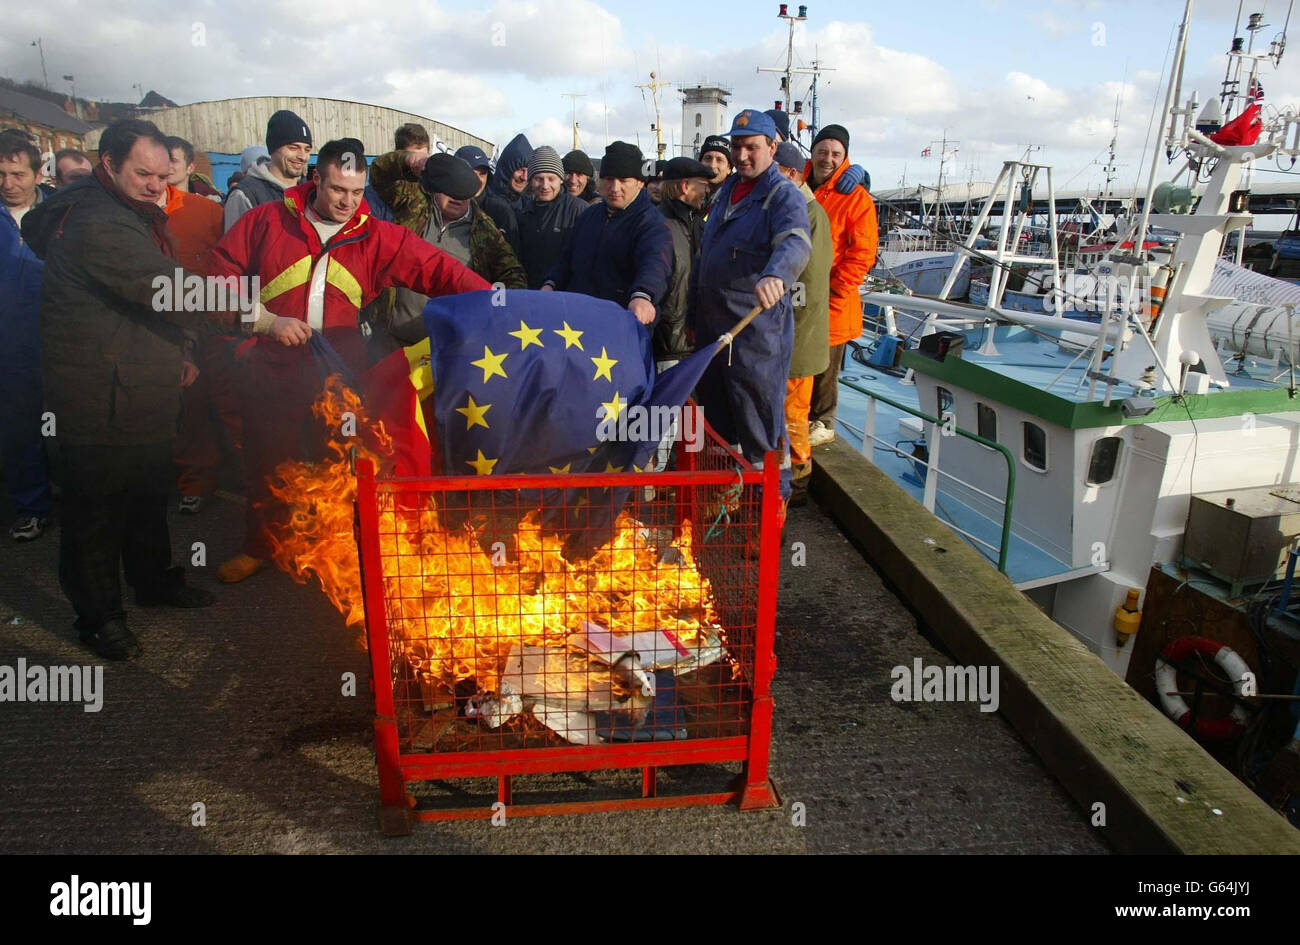 Fishermen at North Shields near Newcastle burn European and Spanish flags in protest about the possible introduction of new European quotas which they say will hit jobs on the East coast of England. * Earlier, a flotilla of fishing boats blocked the River Tyne as part of the demonstration. Stock Photo